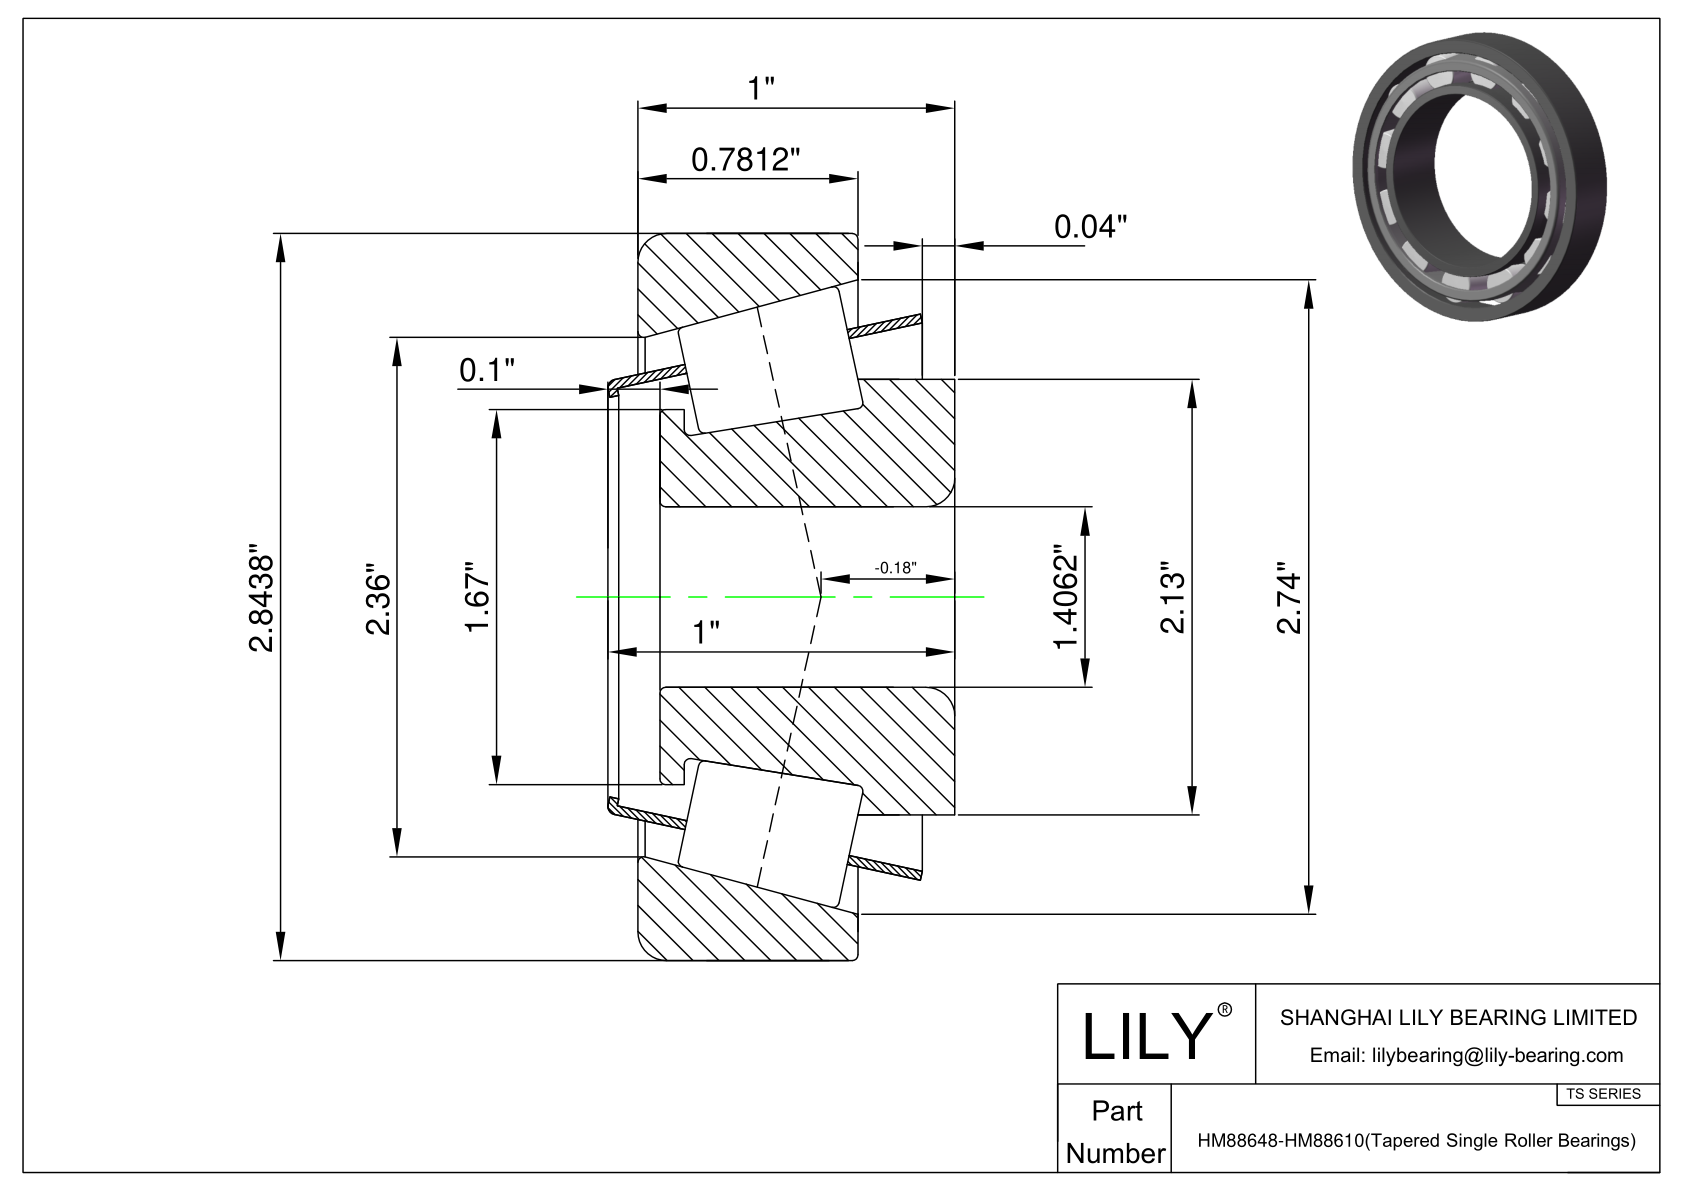 HM88648-HM88610 TS (Tapered Single Roller Bearings) (Imperial) cad drawing